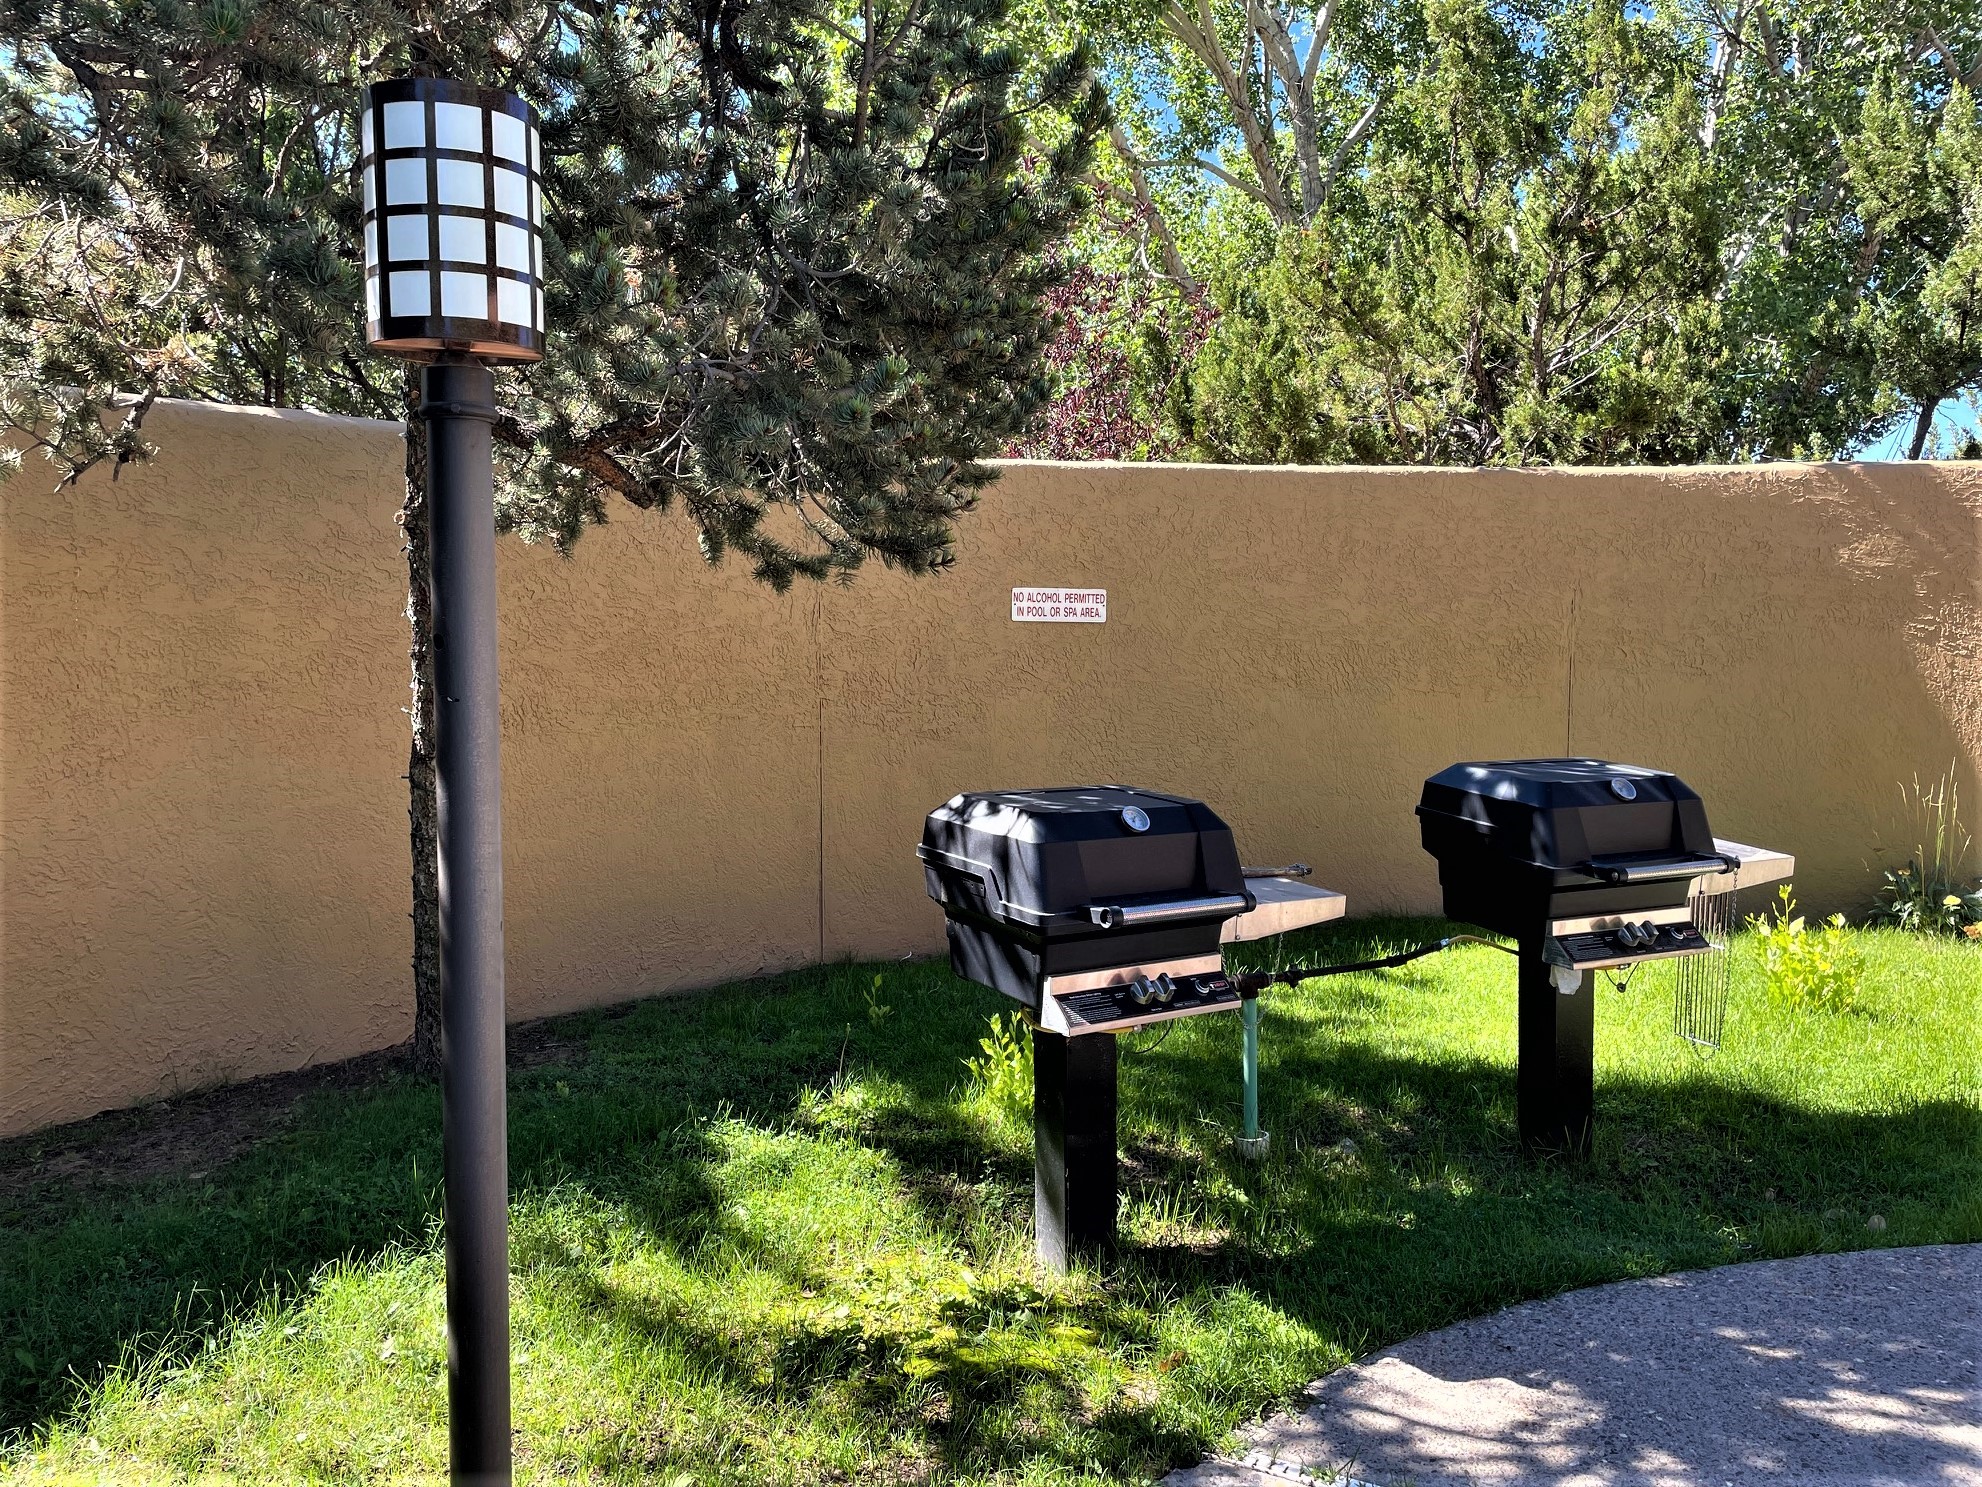 BBQ Areas Throughout the Community